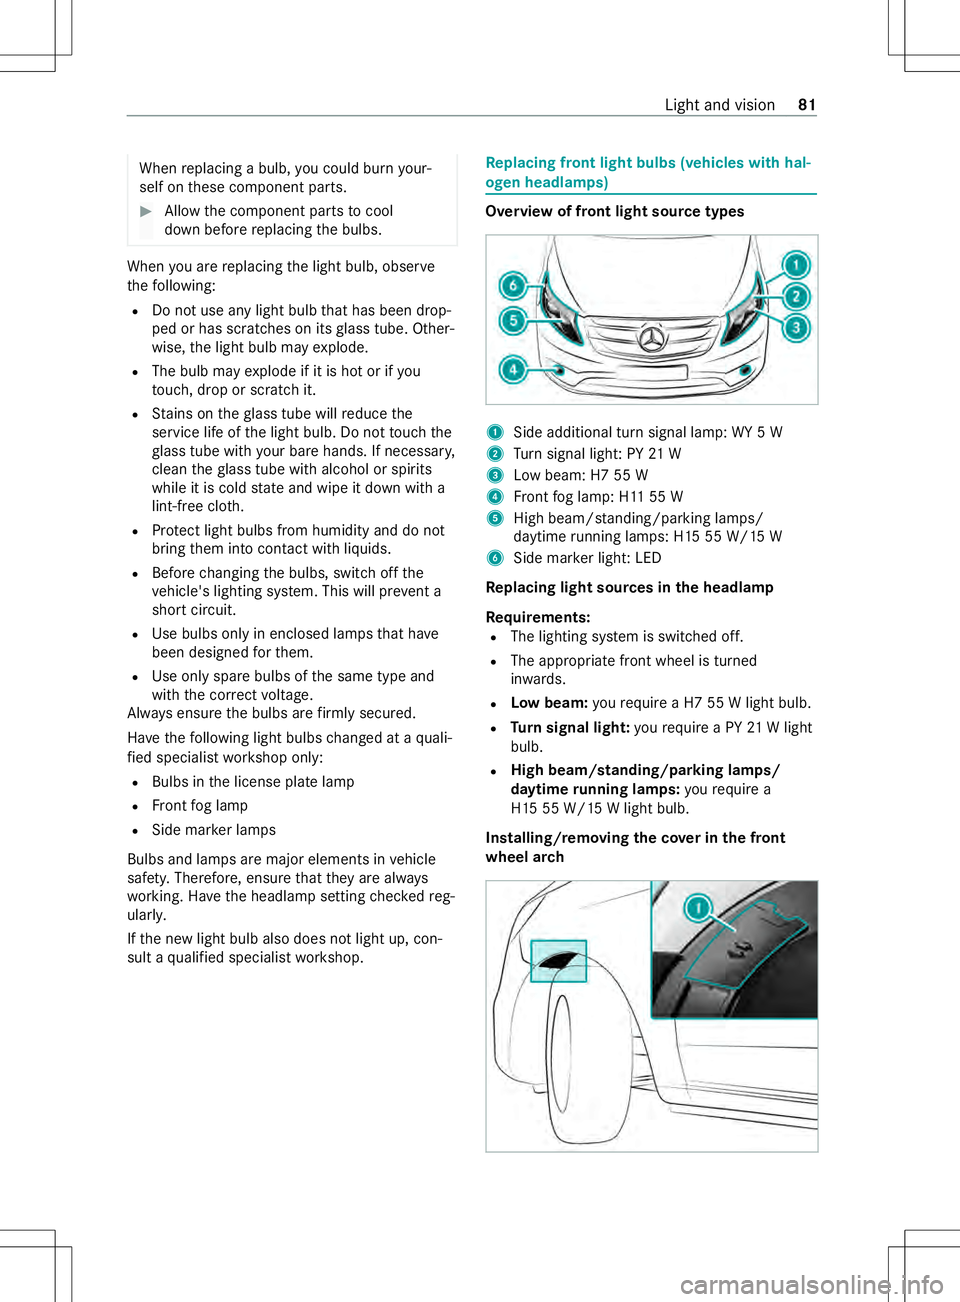 MERCEDES-BENZ METRIS 2021  MY21 Operators Manual When
replacing abulb, youc oul db urny our‐
self on these componen tparts. #
Allowthe component parts tocool
down befor ereplacing theb ulbs. When
youa re re placing thel ight bulb, obser ve
th ef o